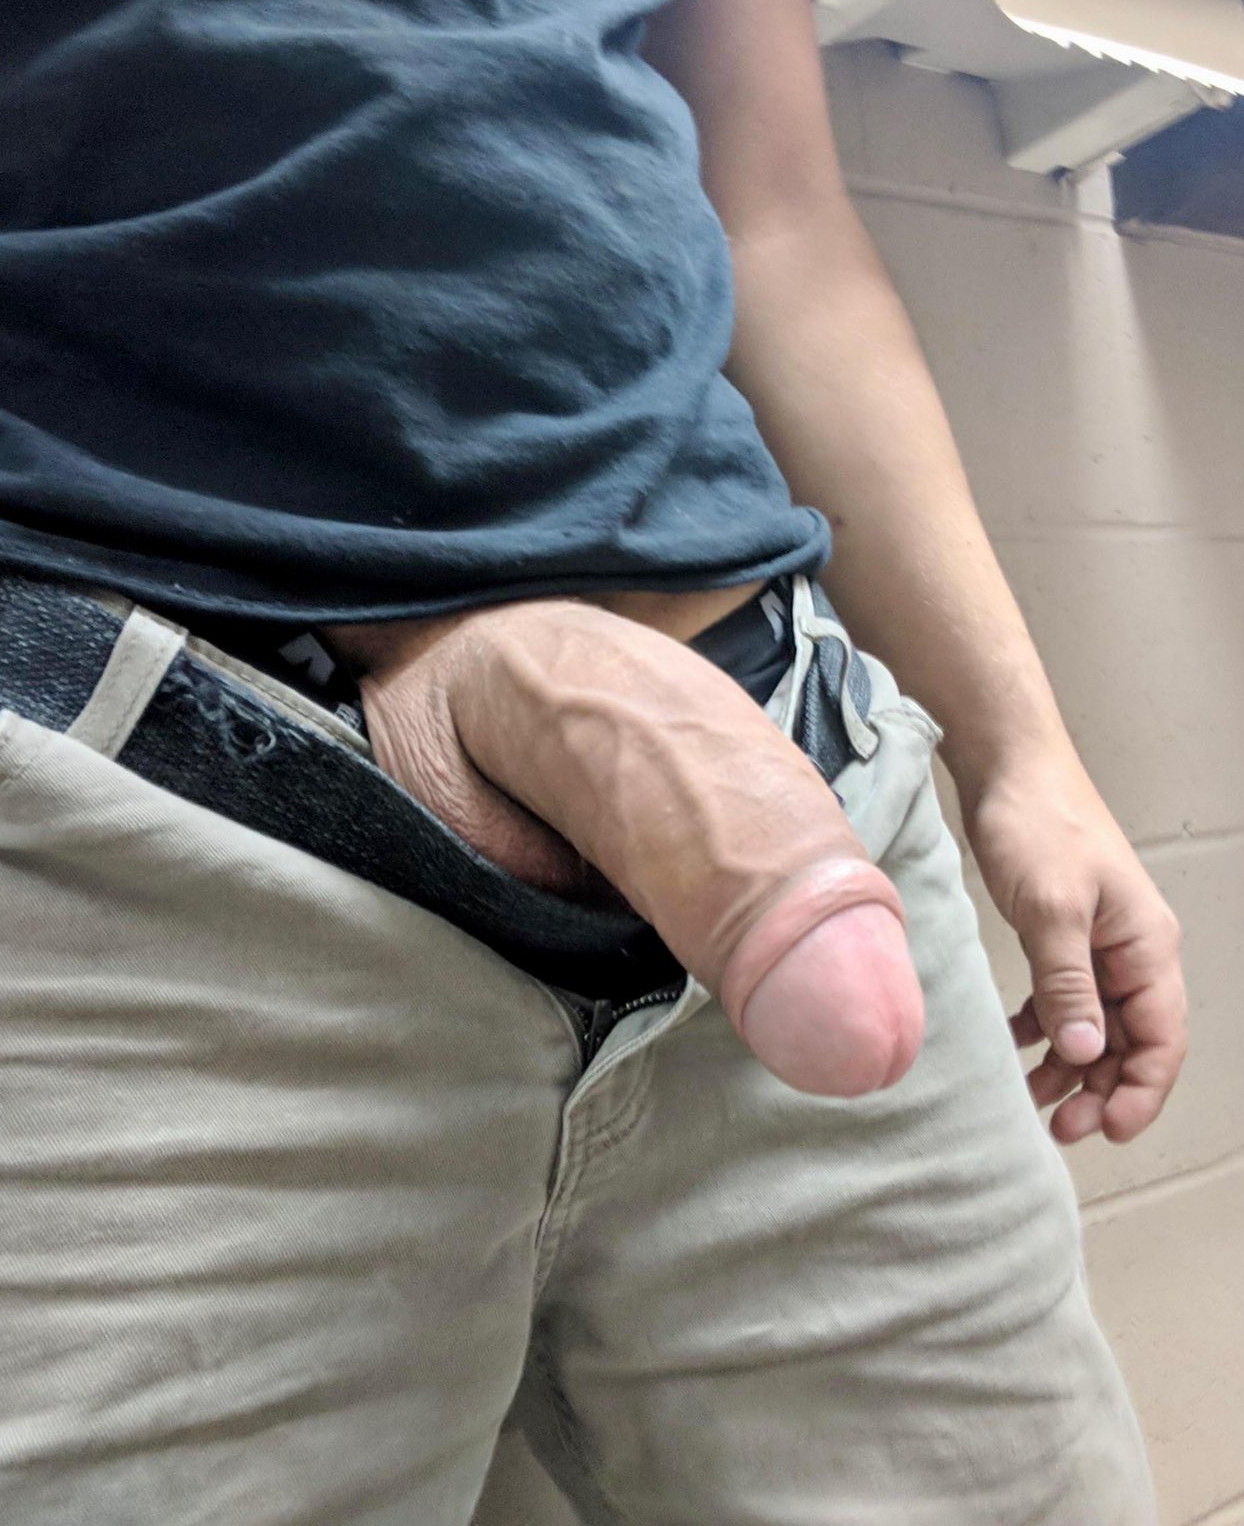 Big Thick Dick In Pants - Thick dick out of pants - Penis Pictures